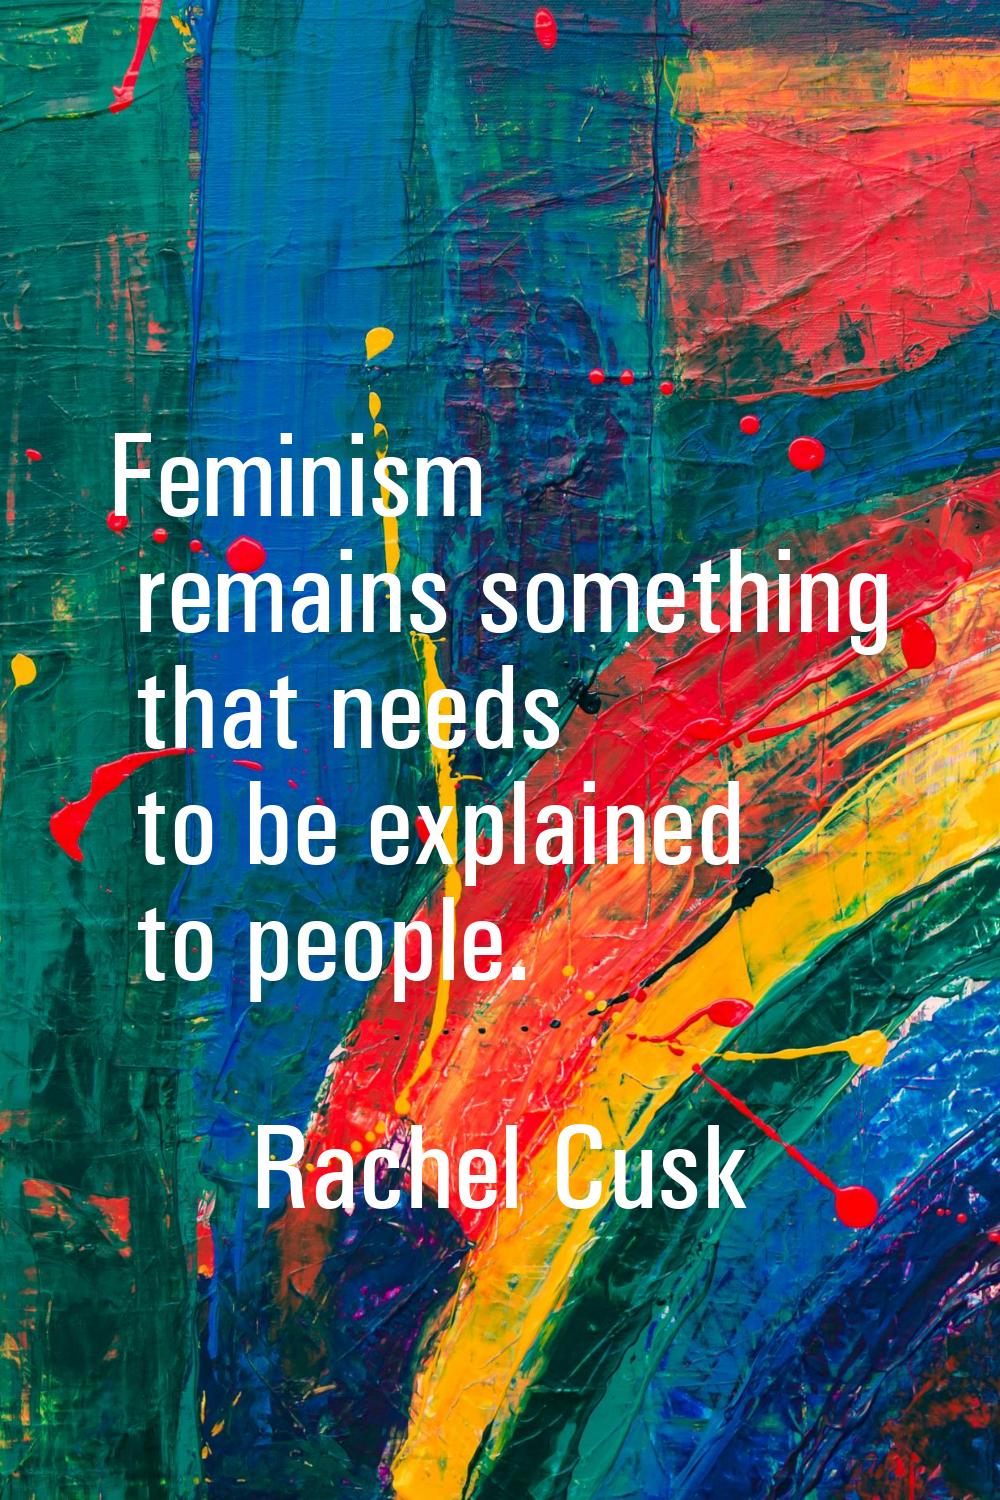 Feminism remains something that needs to be explained to people.